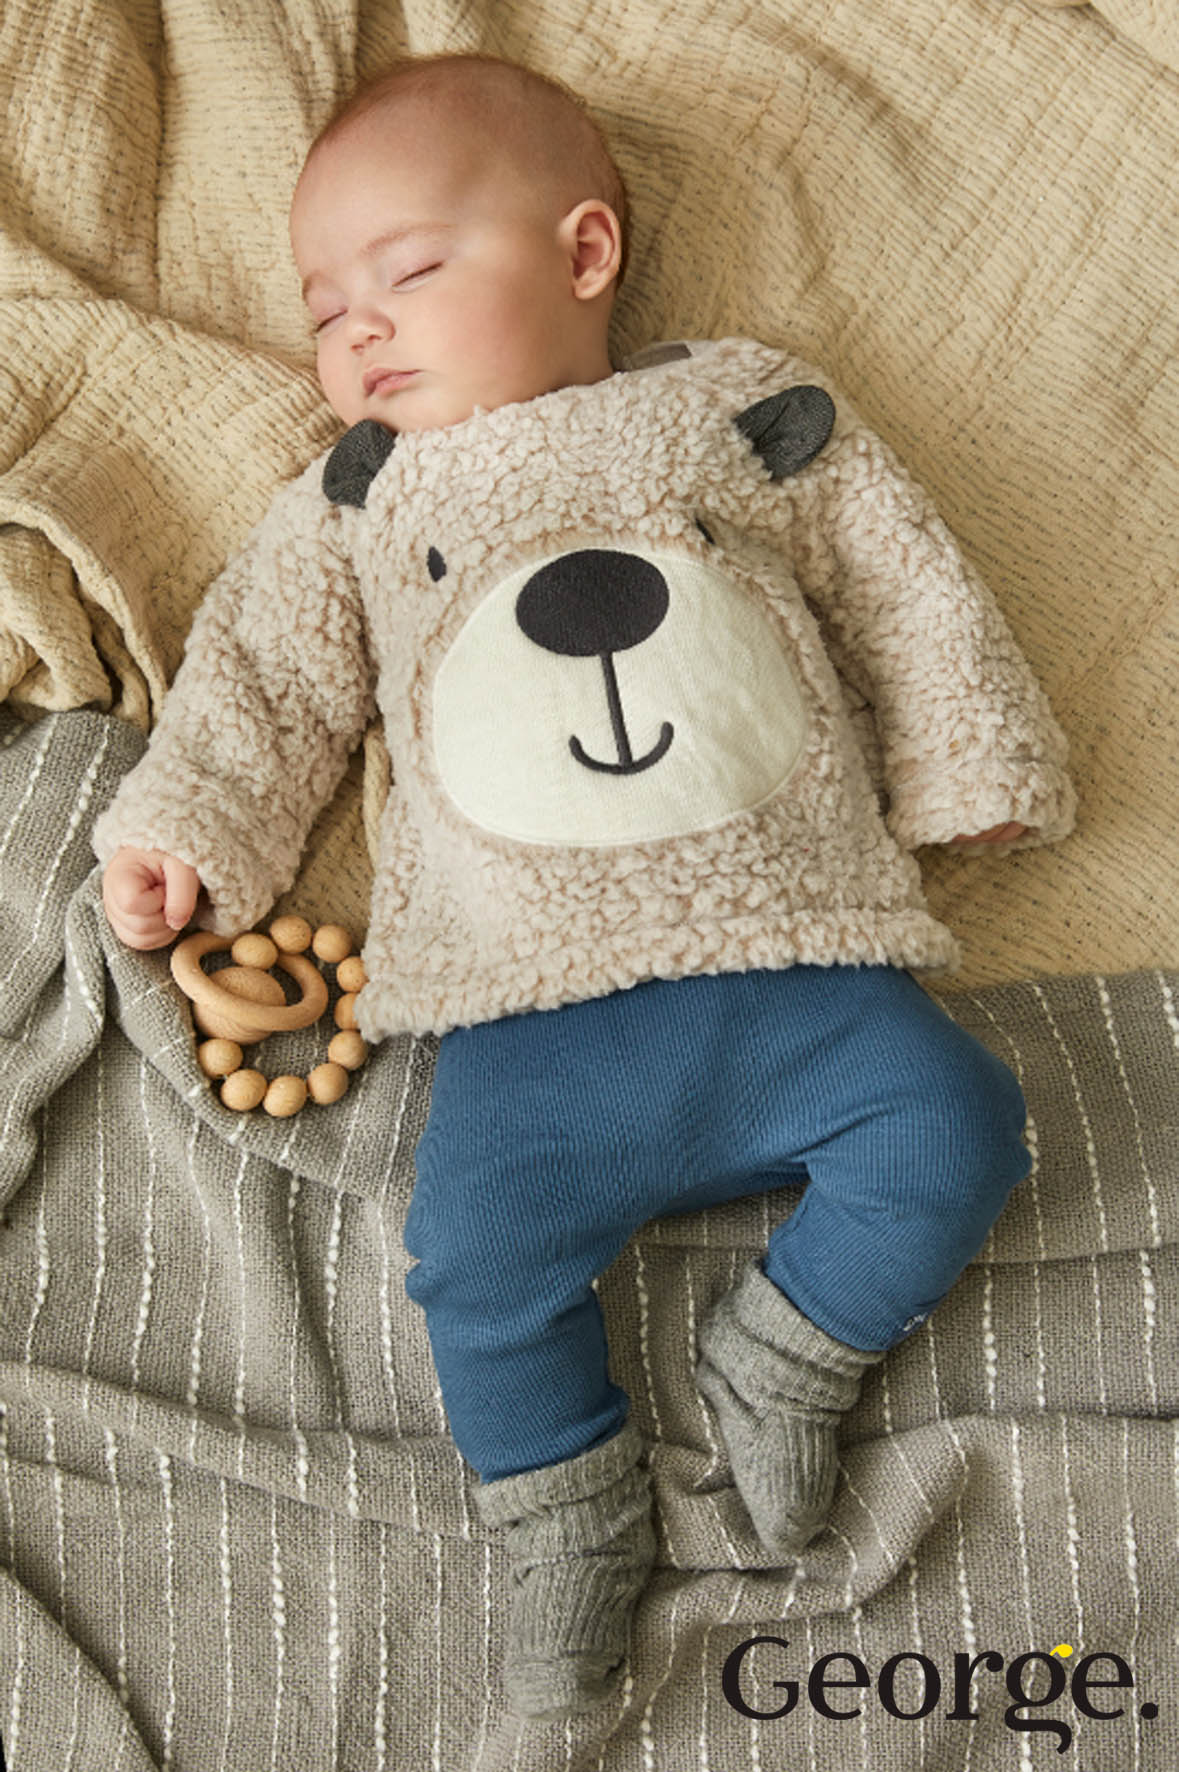 Teddy for George Asda – Bruce and Brown